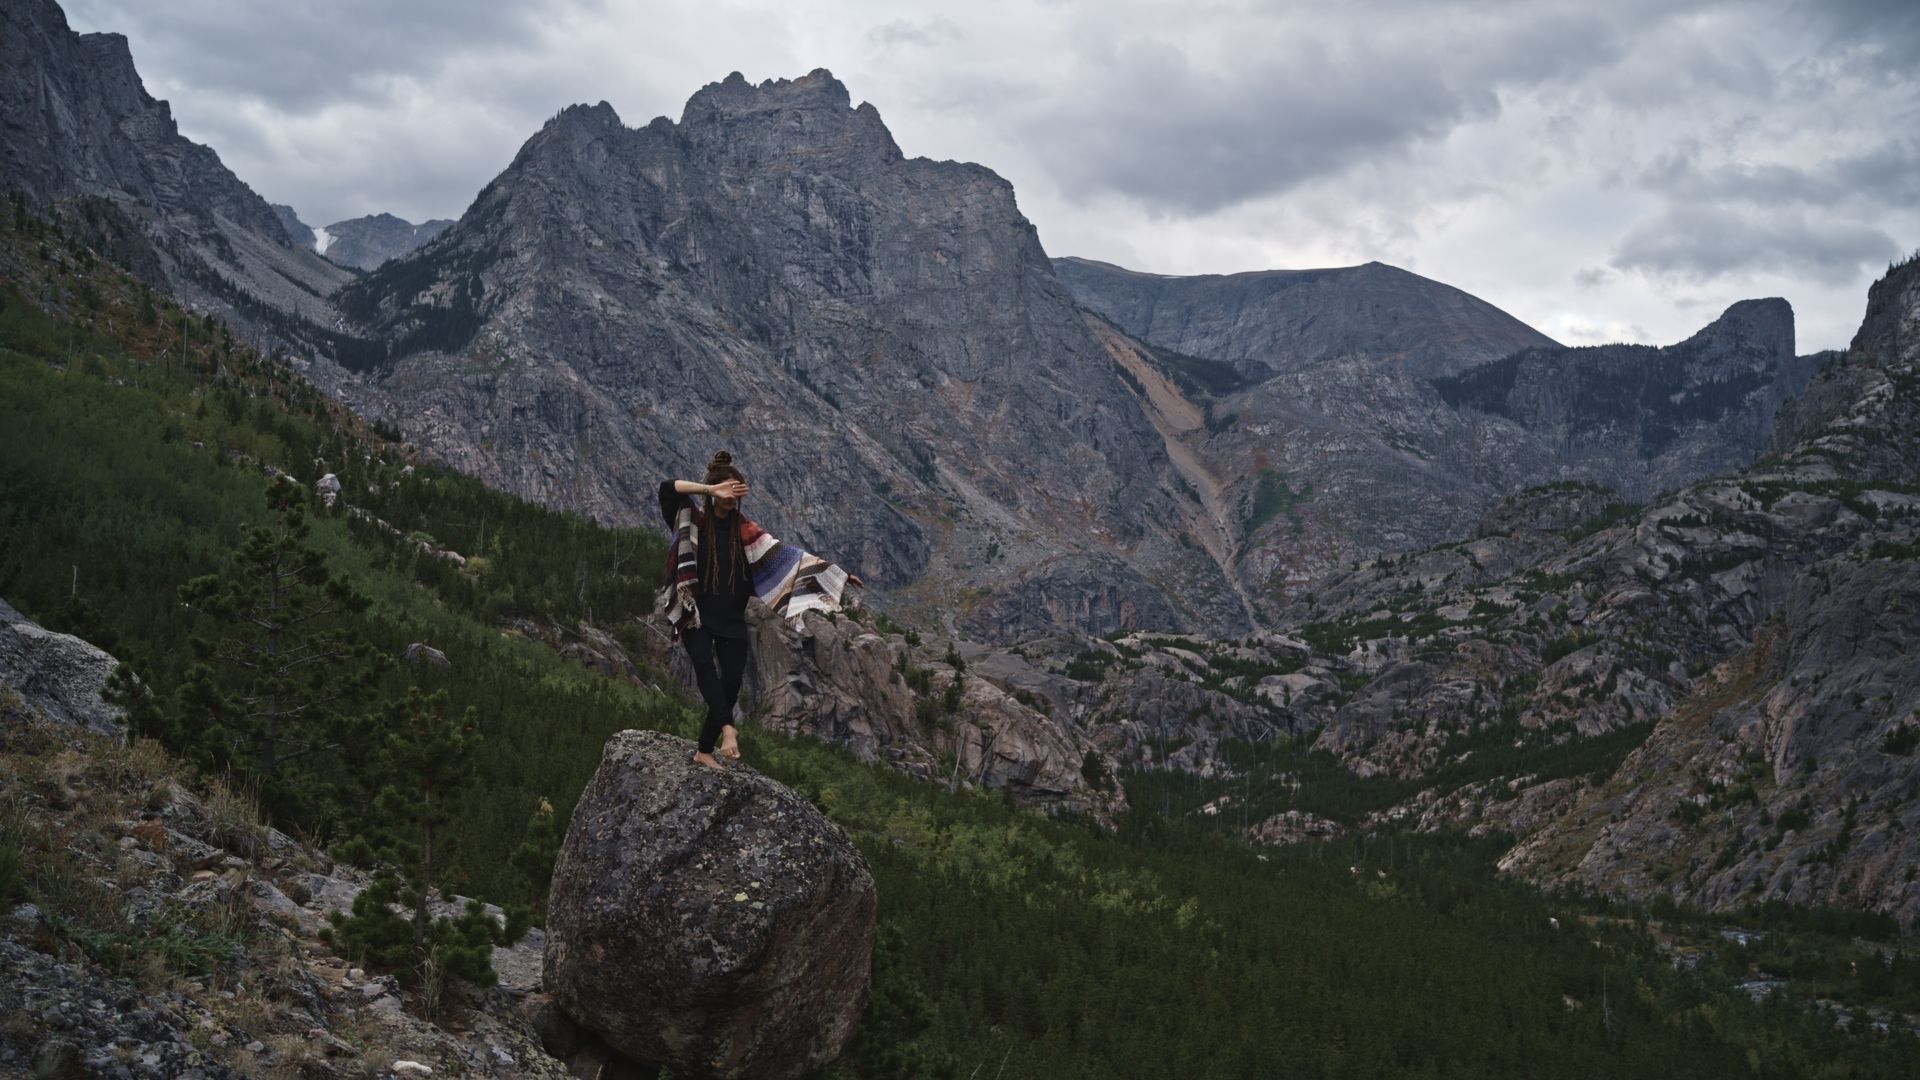 A woman stands atop a boulder wearing a handwoven striped blanket, in a majestic mountain valley